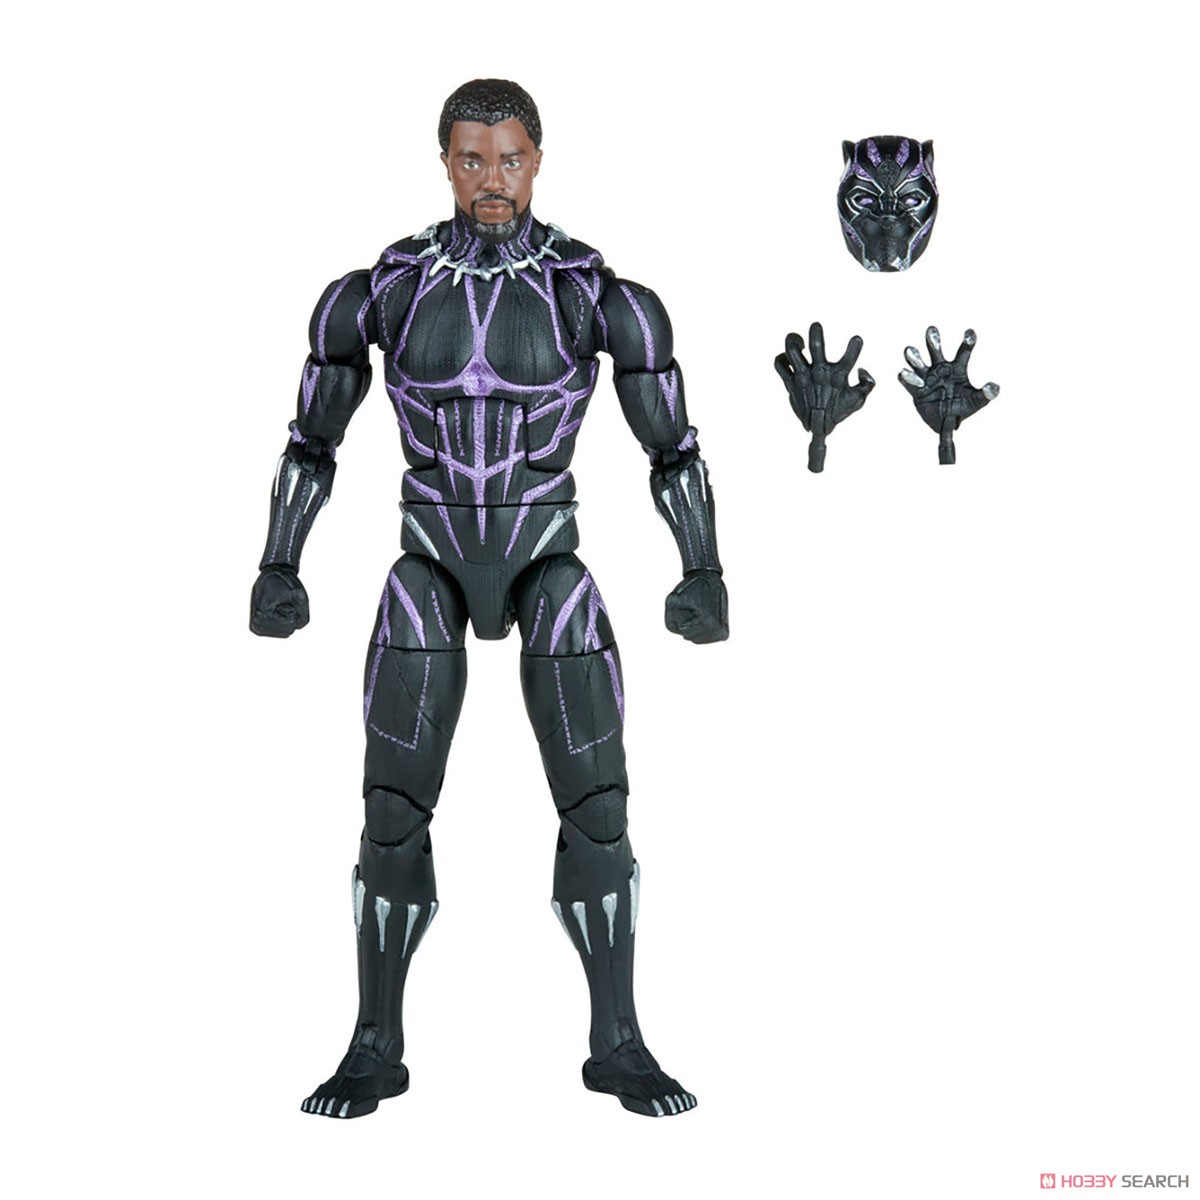 Marvel - Marvel Legends: 6 Inch Action Figure - MCU Series / Legacy Collection: Black Panther [Movie / Black Panther] (Completed) Item picture6